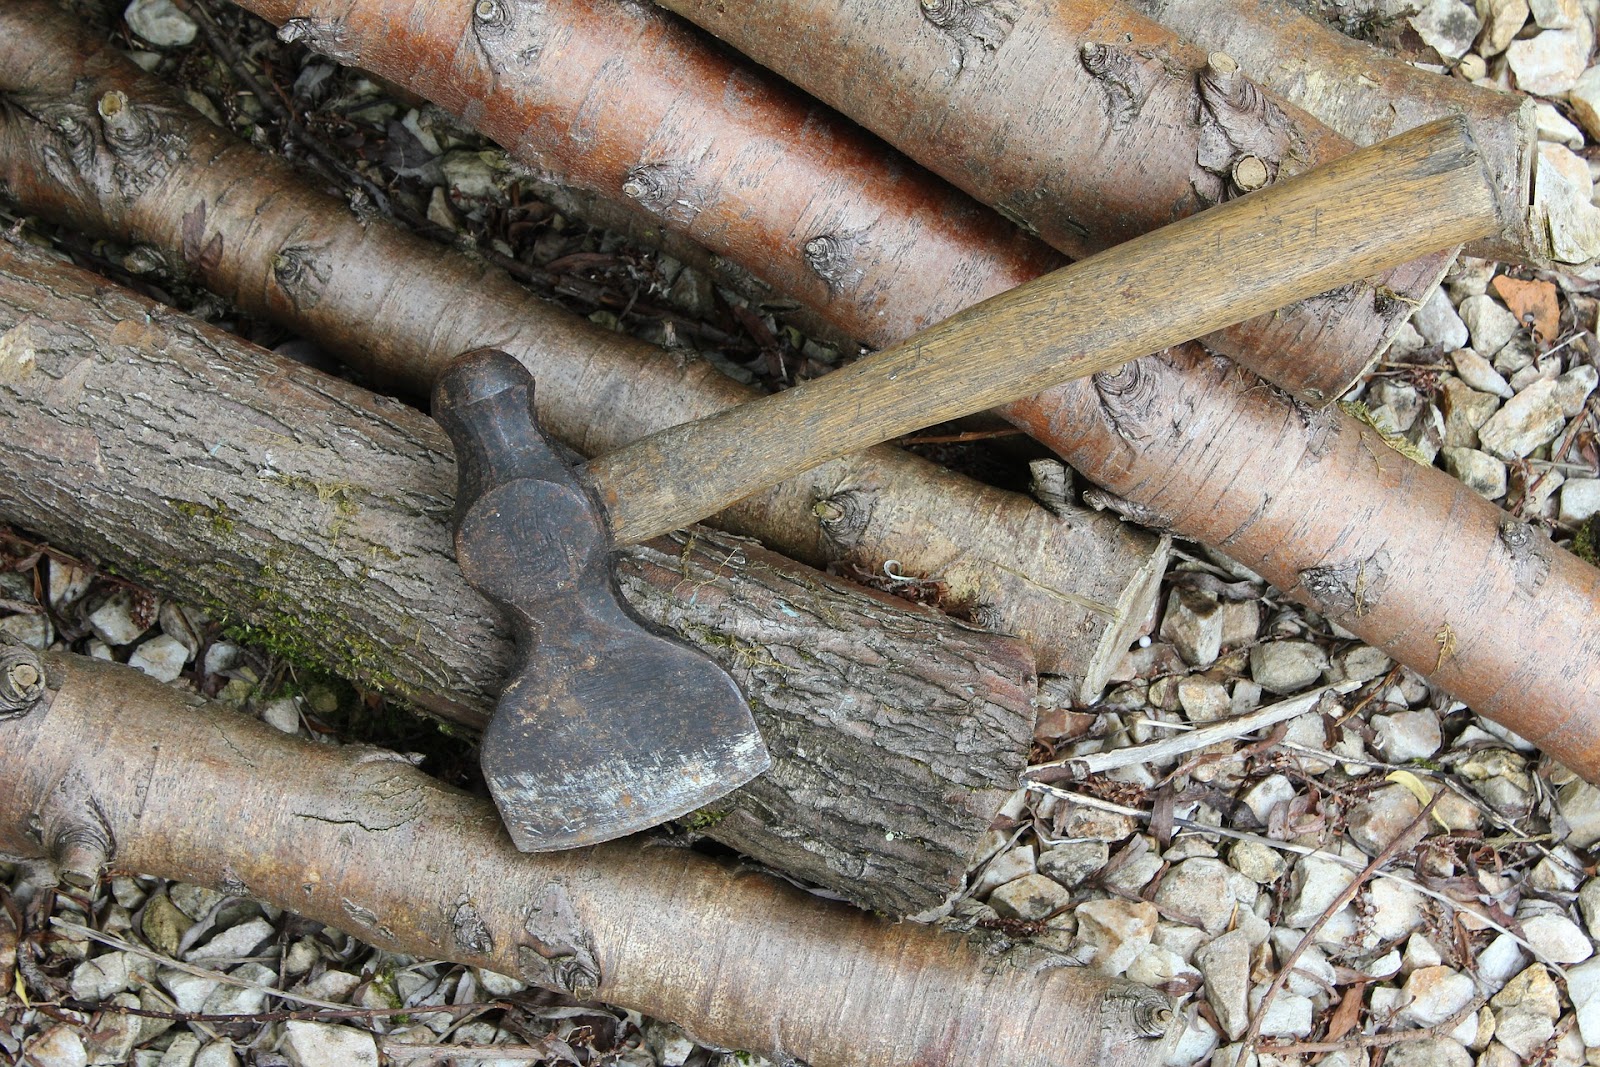 old-fashioned hatchet on top of cut logs